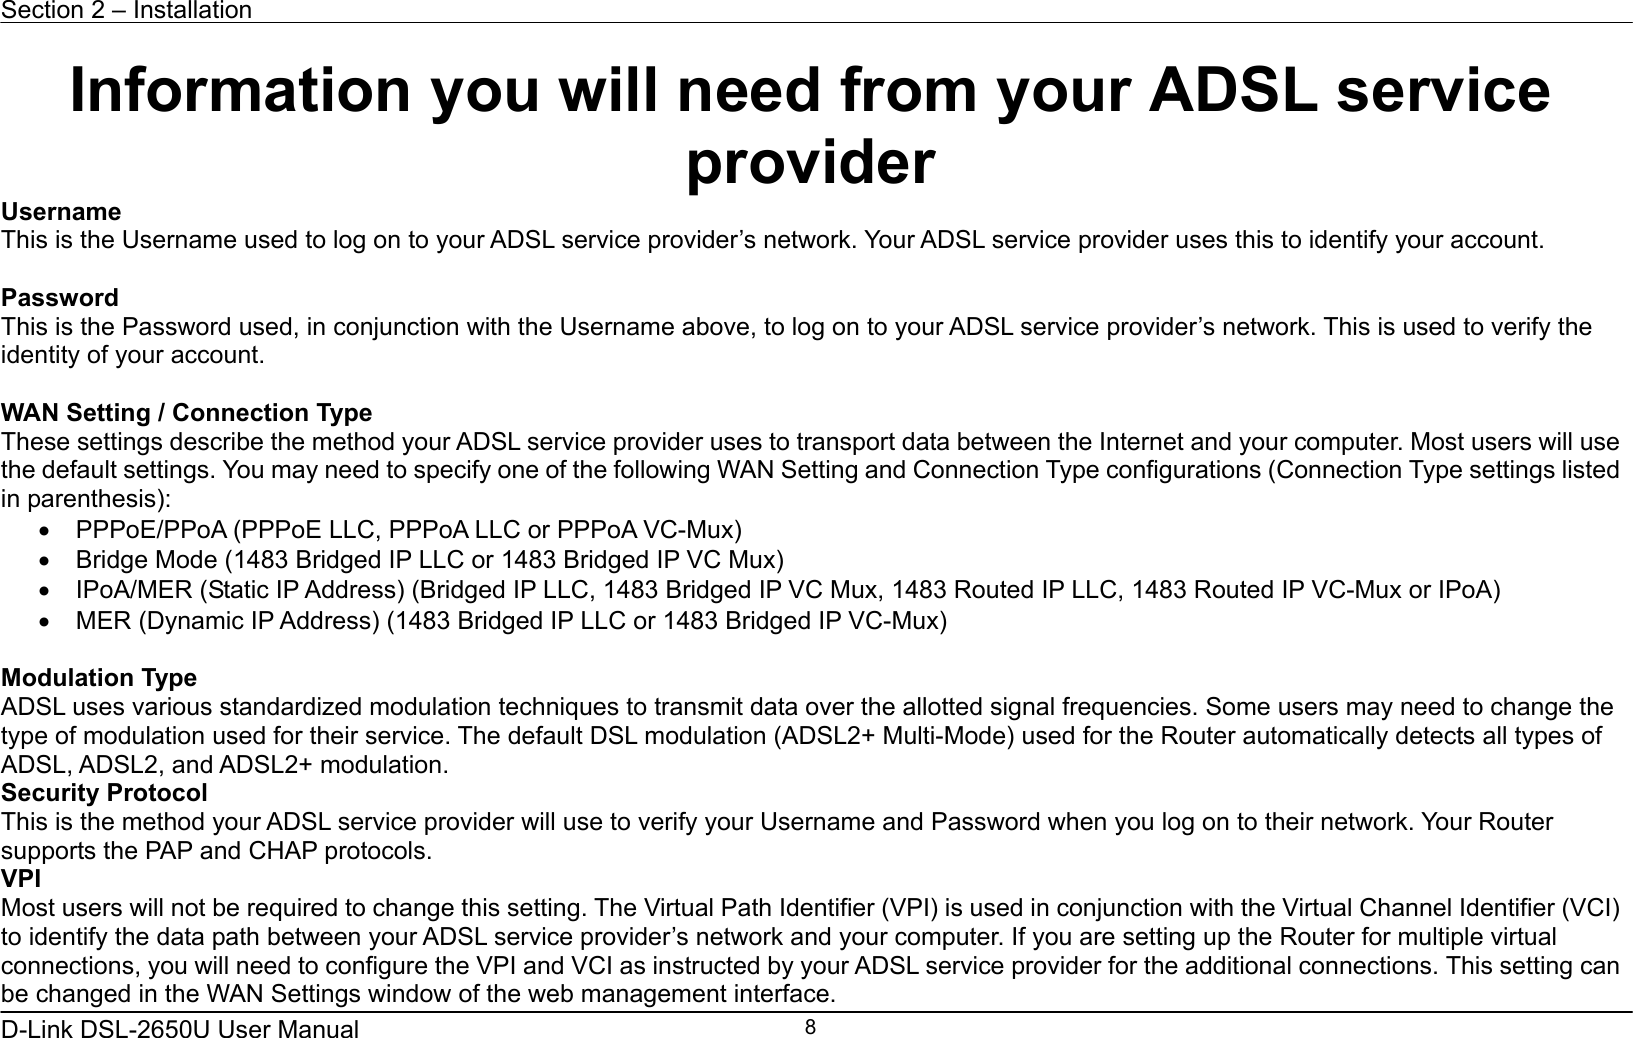 Section 2 – Installation   D-Link DSL-2650U User Manual    8Information you will need from your ADSL service provider Username This is the Username used to log on to your ADSL service provider’s network. Your ADSL service provider uses this to identify your account.  Password This is the Password used, in conjunction with the Username above, to log on to your ADSL service provider’s network. This is used to verify the identity of your account.  WAN Setting / Connection Type These settings describe the method your ADSL service provider uses to transport data between the Internet and your computer. Most users will use the default settings. You may need to specify one of the following WAN Setting and Connection Type configurations (Connection Type settings listed in parenthesis):   •  PPPoE/PPoA (PPPoE LLC, PPPoA LLC or PPPoA VC-Mux) •  Bridge Mode (1483 Bridged IP LLC or 1483 Bridged IP VC Mux) •  IPoA/MER (Static IP Address) (Bridged IP LLC, 1483 Bridged IP VC Mux, 1483 Routed IP LLC, 1483 Routed IP VC-Mux or IPoA) •  MER (Dynamic IP Address) (1483 Bridged IP LLC or 1483 Bridged IP VC-Mux)      Modulation Type ADSL uses various standardized modulation techniques to transmit data over the allotted signal frequencies. Some users may need to change the type of modulation used for their service. The default DSL modulation (ADSL2+ Multi-Mode) used for the Router automatically detects all types of ADSL, ADSL2, and ADSL2+ modulation. Security Protocol This is the method your ADSL service provider will use to verify your Username and Password when you log on to their network. Your Router supports the PAP and CHAP protocols. VPI Most users will not be required to change this setting. The Virtual Path Identifier (VPI) is used in conjunction with the Virtual Channel Identifier (VCI) to identify the data path between your ADSL service provider’s network and your computer. If you are setting up the Router for multiple virtual connections, you will need to configure the VPI and VCI as instructed by your ADSL service provider for the additional connections. This setting can be changed in the WAN Settings window of the web management interface.   